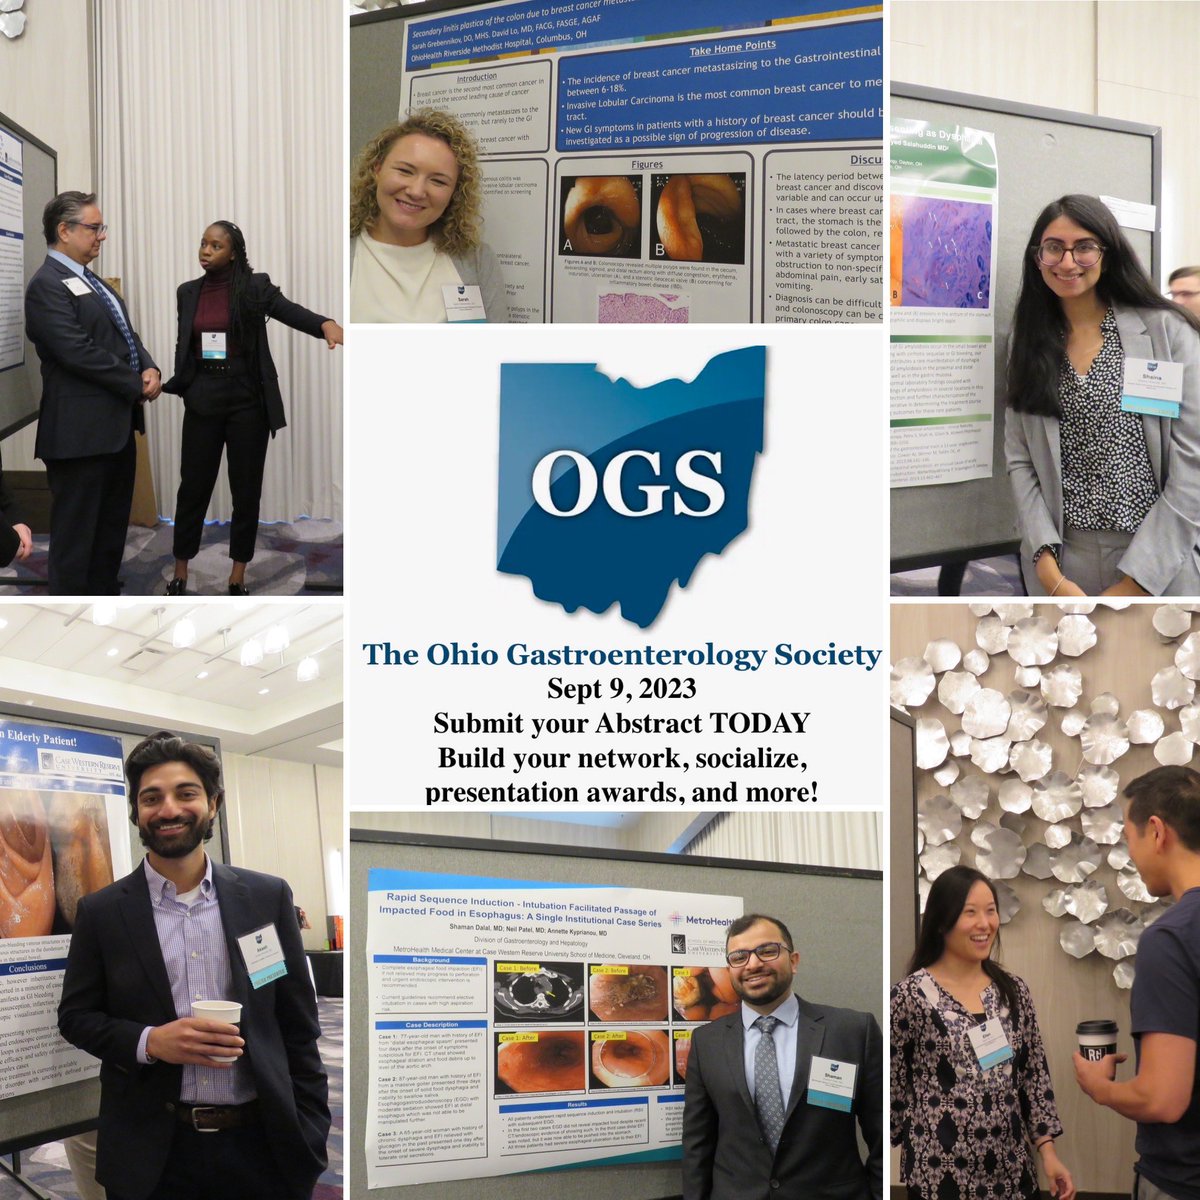 Submit a poster abstract @ the Sept. 9 OGS Annual Meeting @ Renaissance Hotel Westerville-Polaris, 7a– 2p Submission deadline: Aug. 6 Notified of acceptance: Aug. 14 💎Submit an abstract (osma.org/aws/OSMA/input…) 💎Meeting details and register (ohiogisociety.org/annual-meeting)